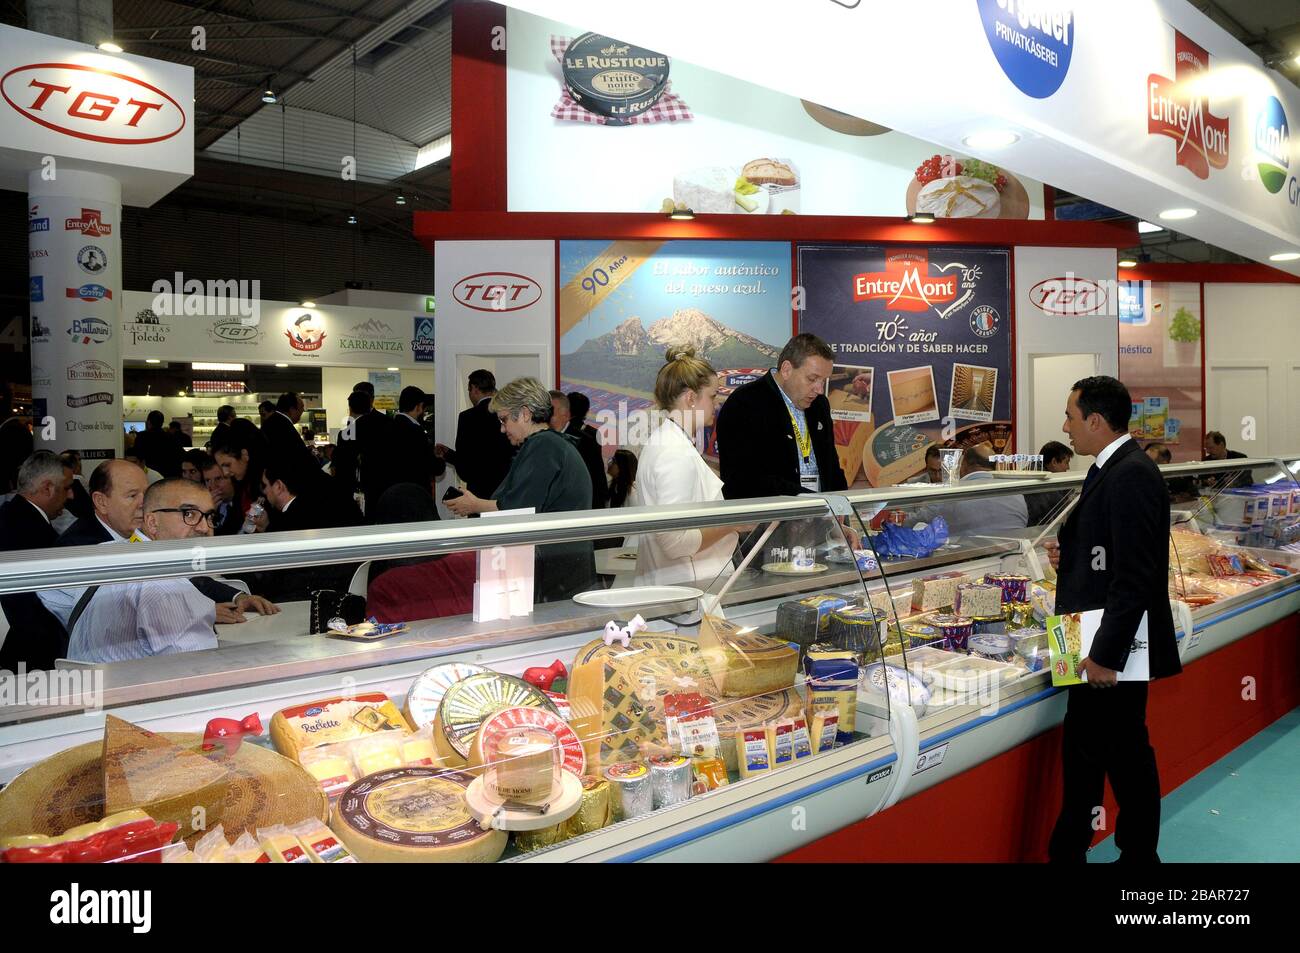 Stand TGT quesos Franceses, feria Alimentaria 2018 Stockfoto